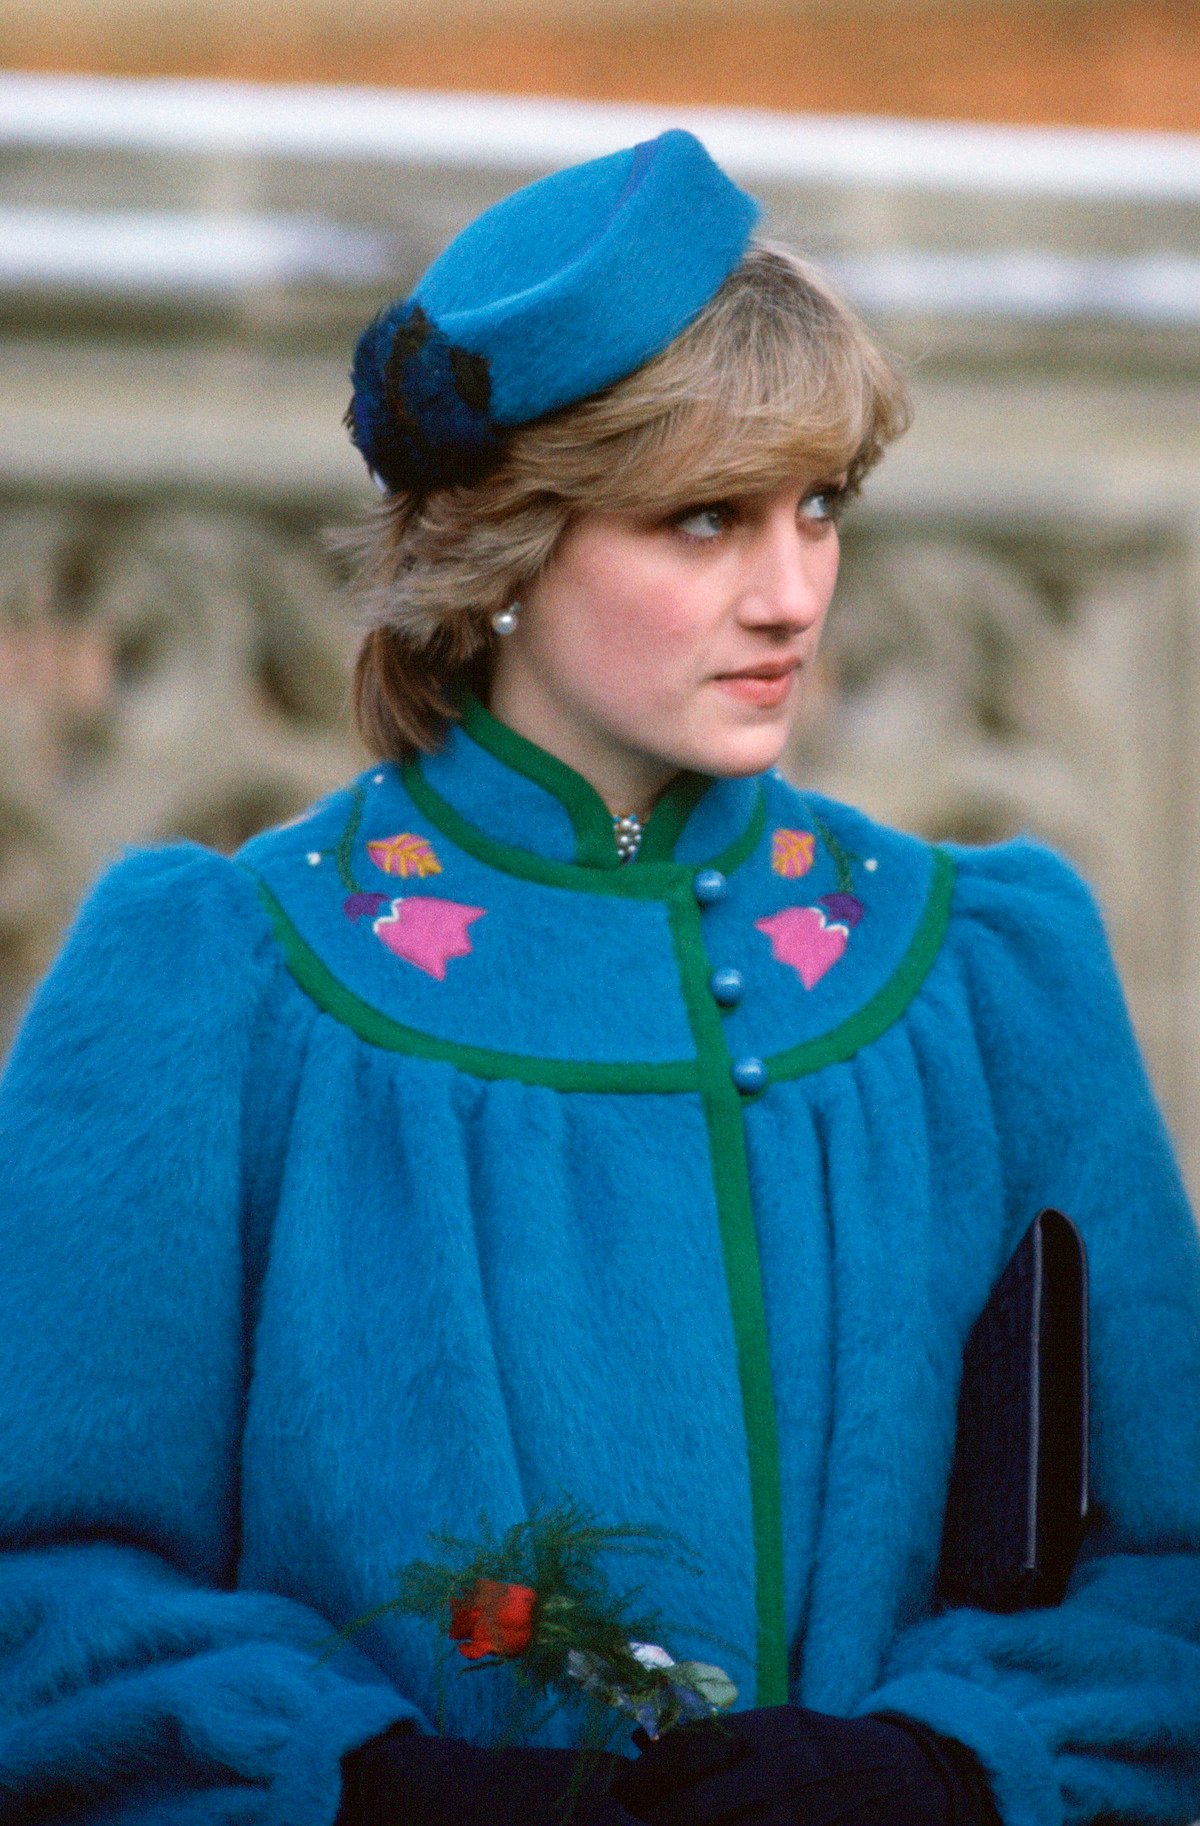 Princess Diana attends a service at S. George's Chapel, on Christmas day, December 25, 1981 in a blue overcoat with a matching pillbox hat